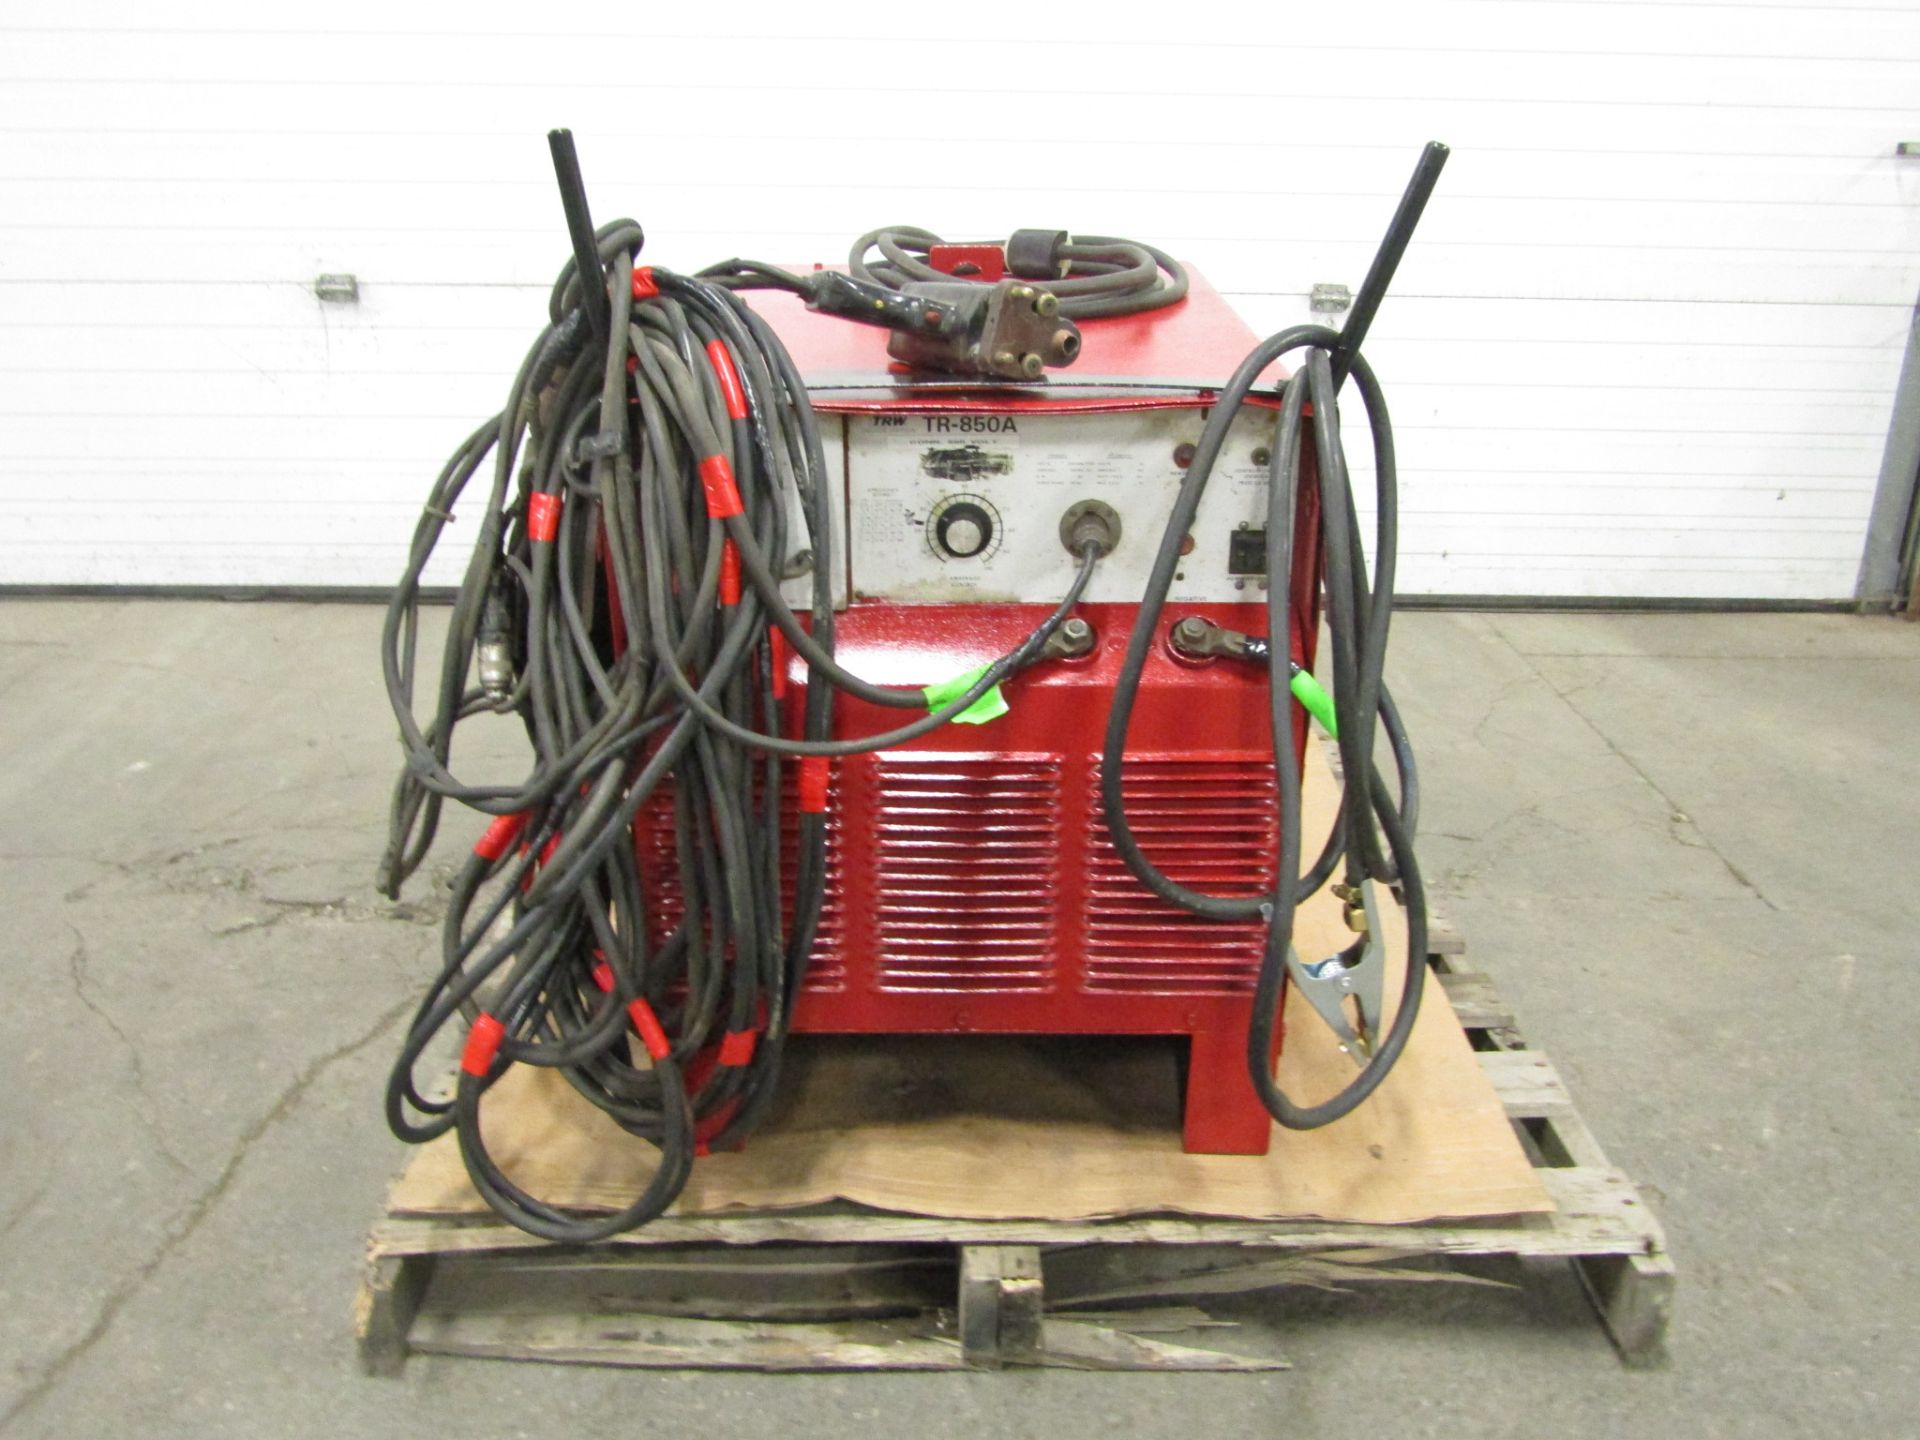 Nelson Stud Welder model TR-850 - 850 AMP SYSTEM complete with stud welding gun and cables